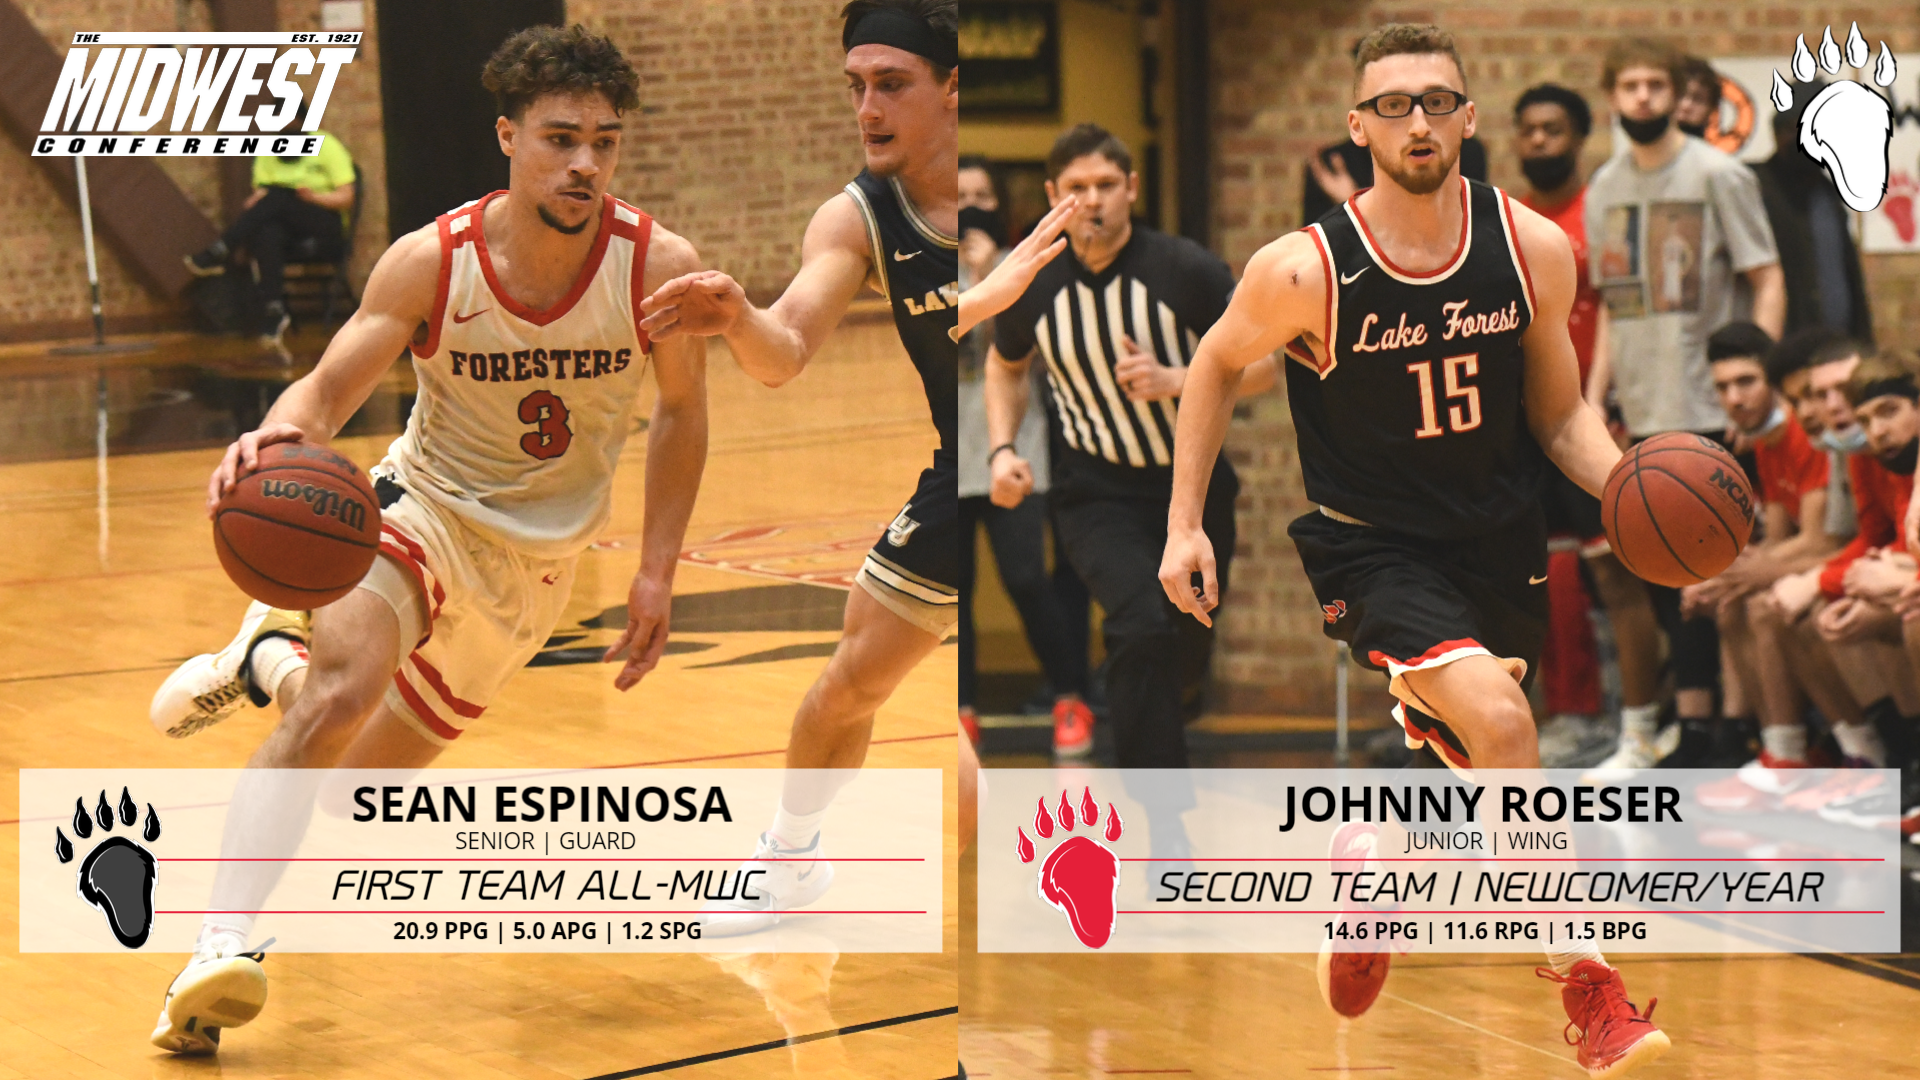 Espinosa and Roeser Earn All-MWC Honors